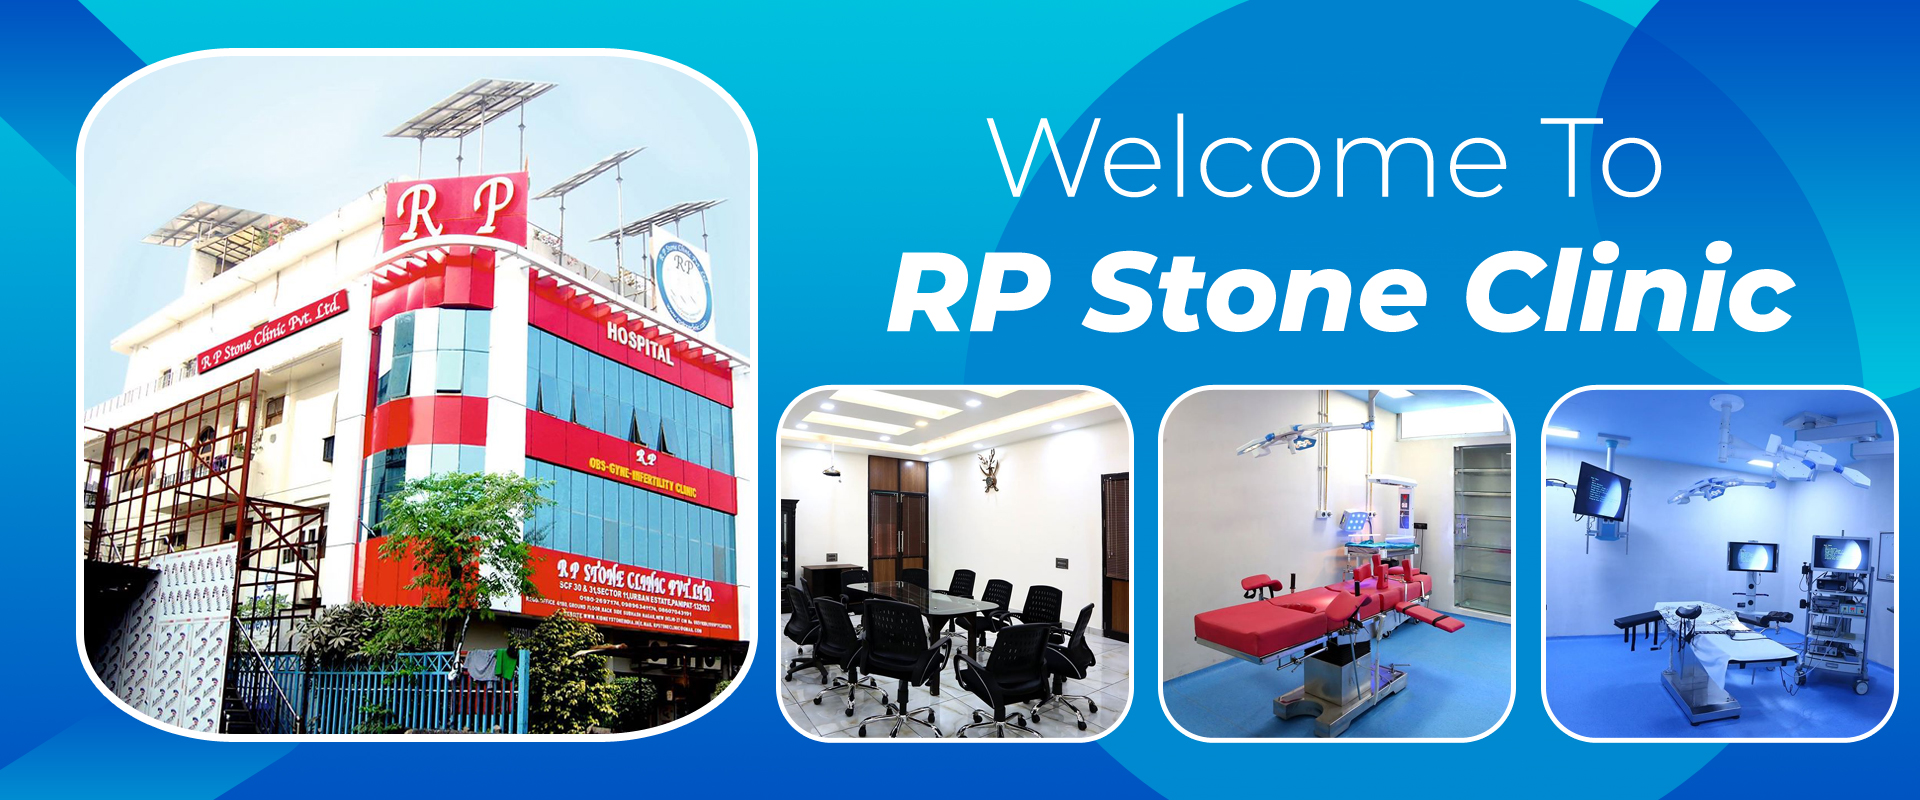 Welcome To R.P Stone Clinic